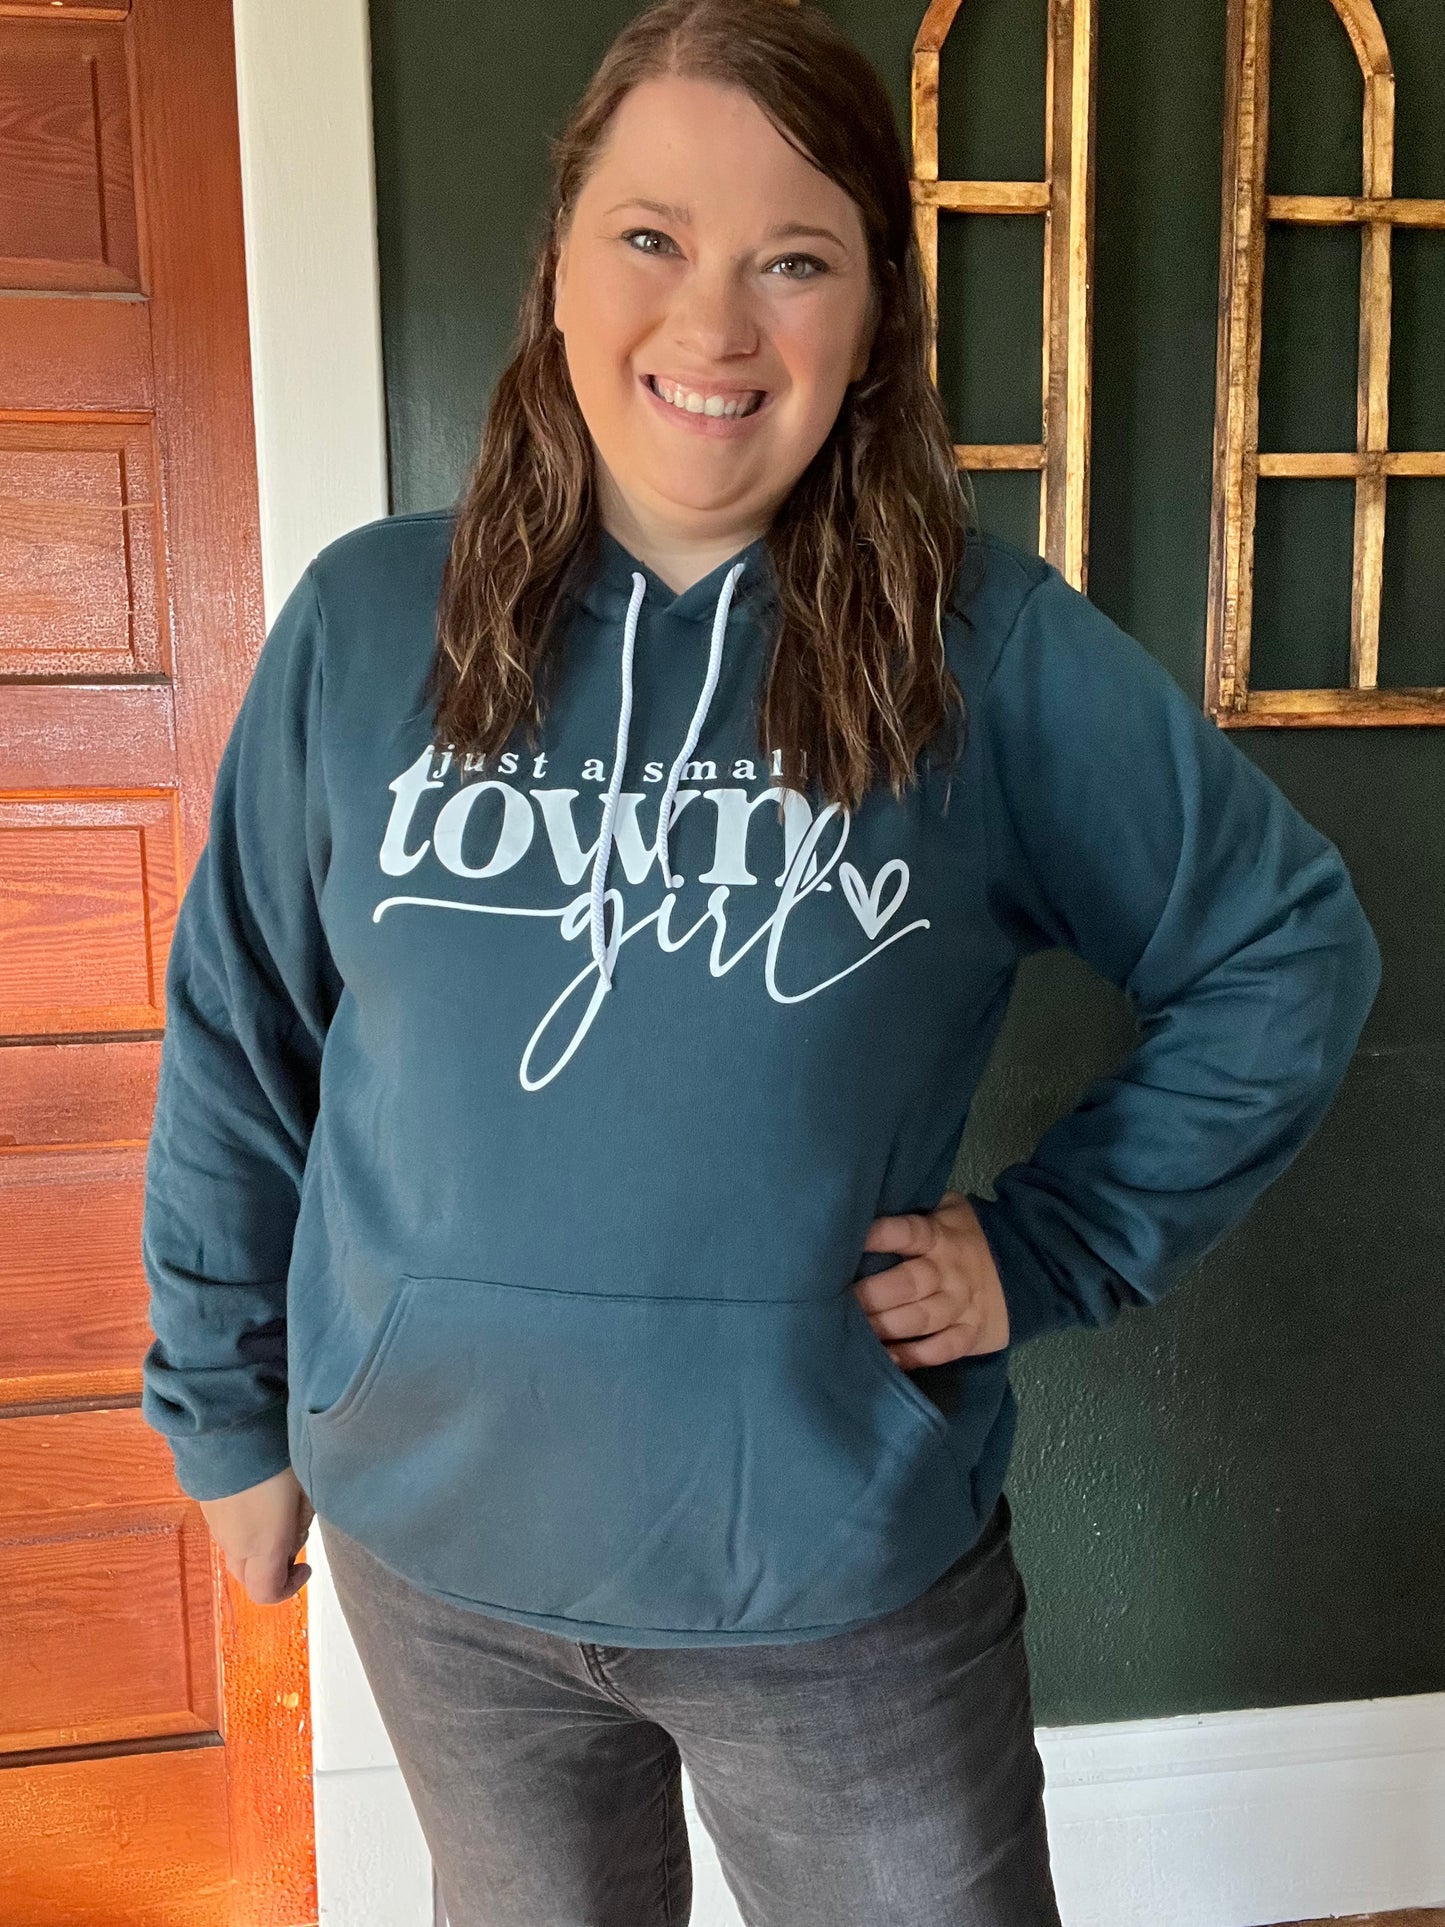 JUST A SMALL TOWN GIRL HOODIE